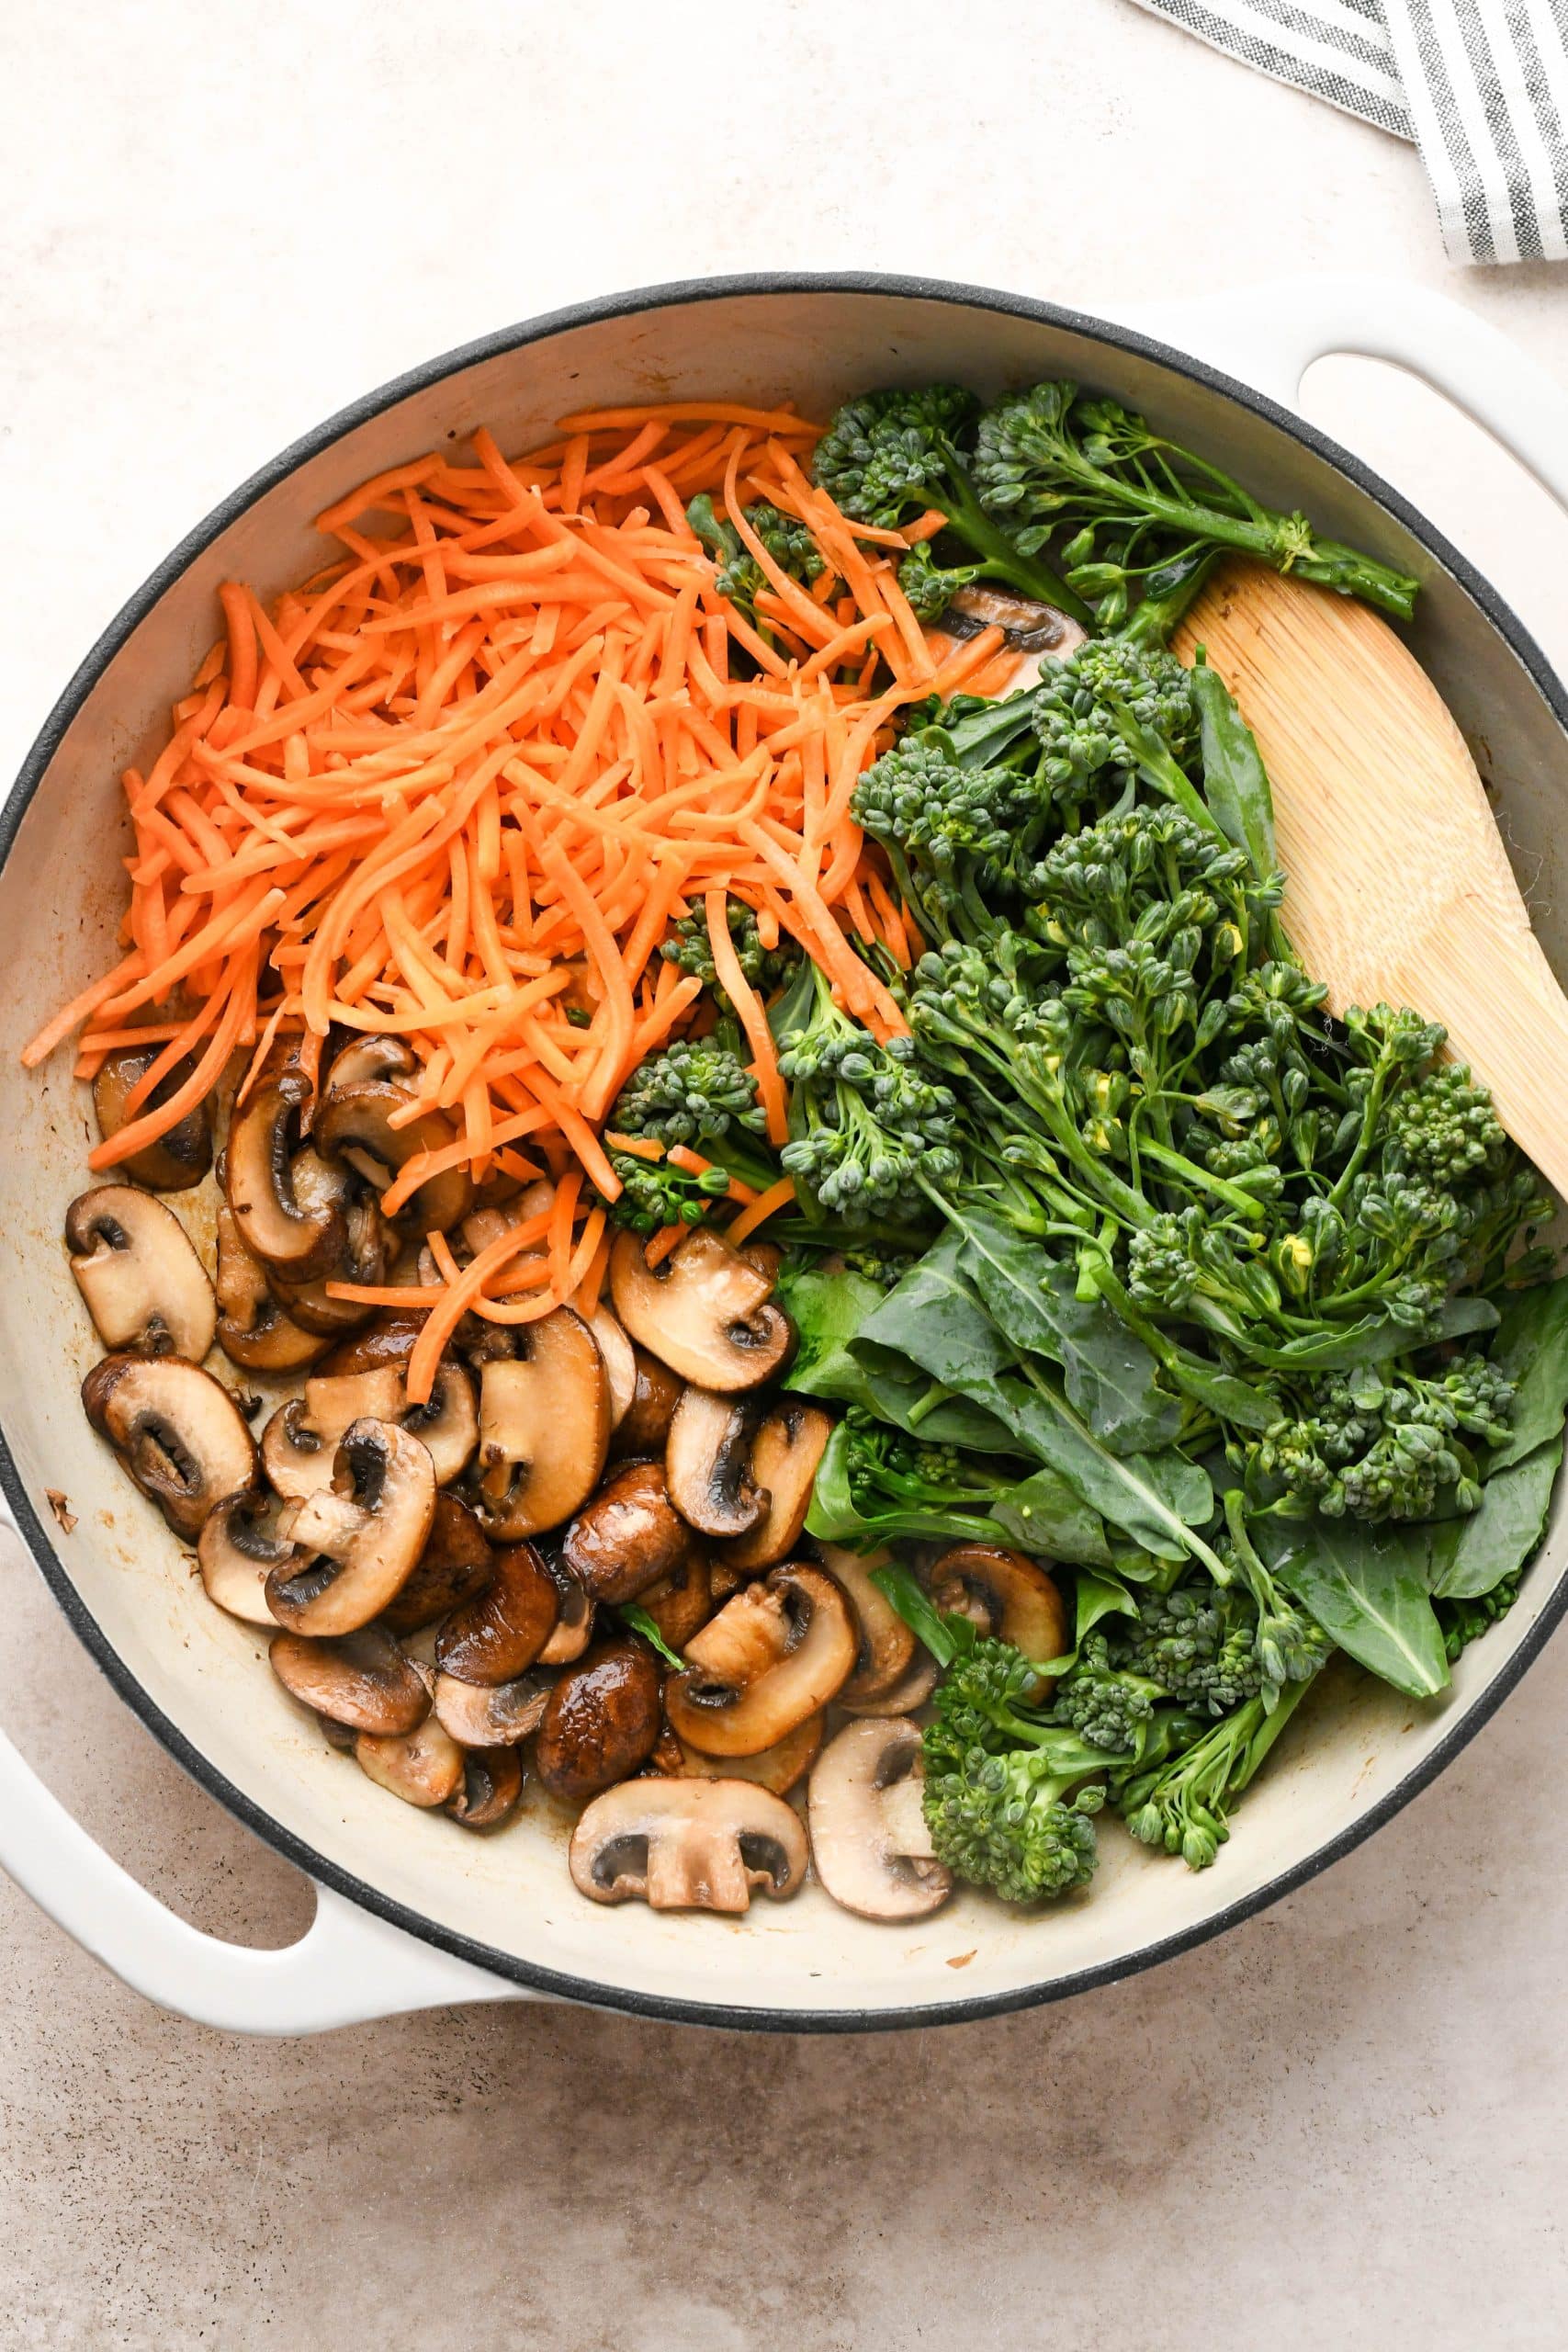 How to make soba noodle stir fry: Seared mushrooms in a skillet with raw broccoli florets and raw shredded carrots.